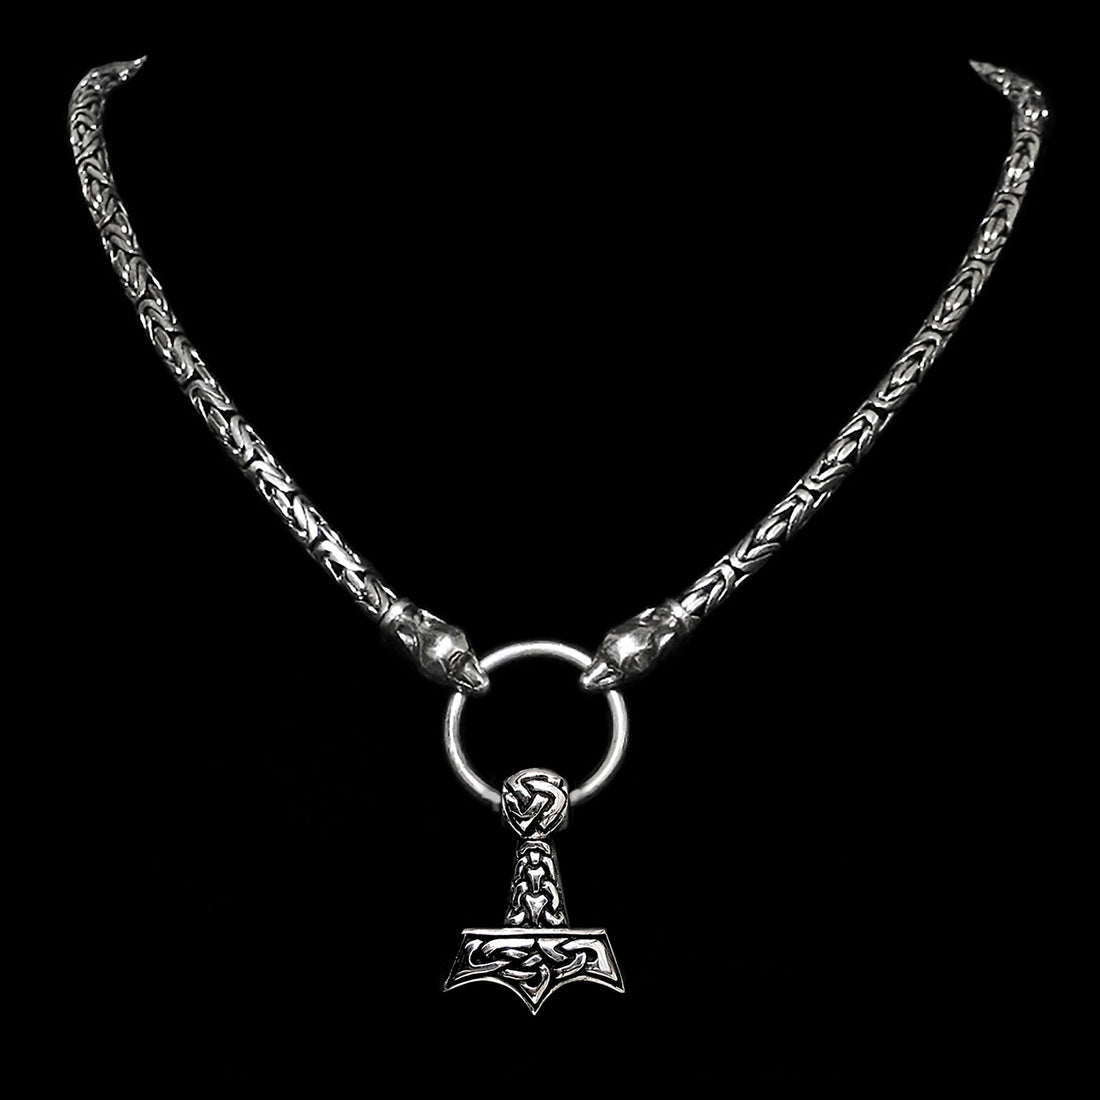 5mm Silver King Chain Thors Hammer Necklace with Ferocious Wolf Heads